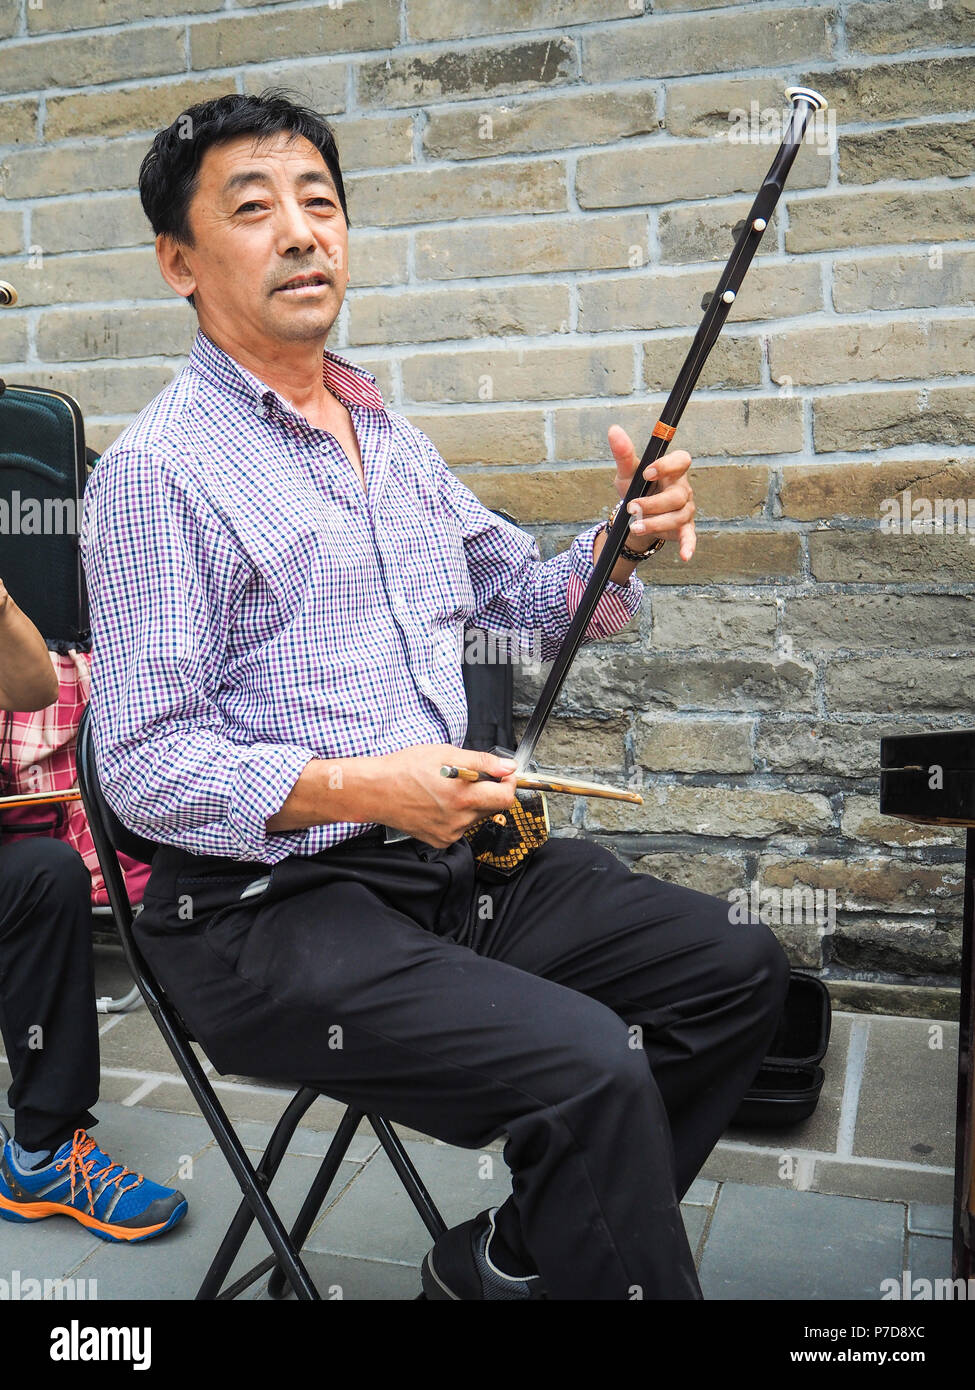 Beijing, China - September 2017: Chinese man playing the Chinese violin called erhu in a small ensemble outdoor at the temple of Heaven Stock Photo